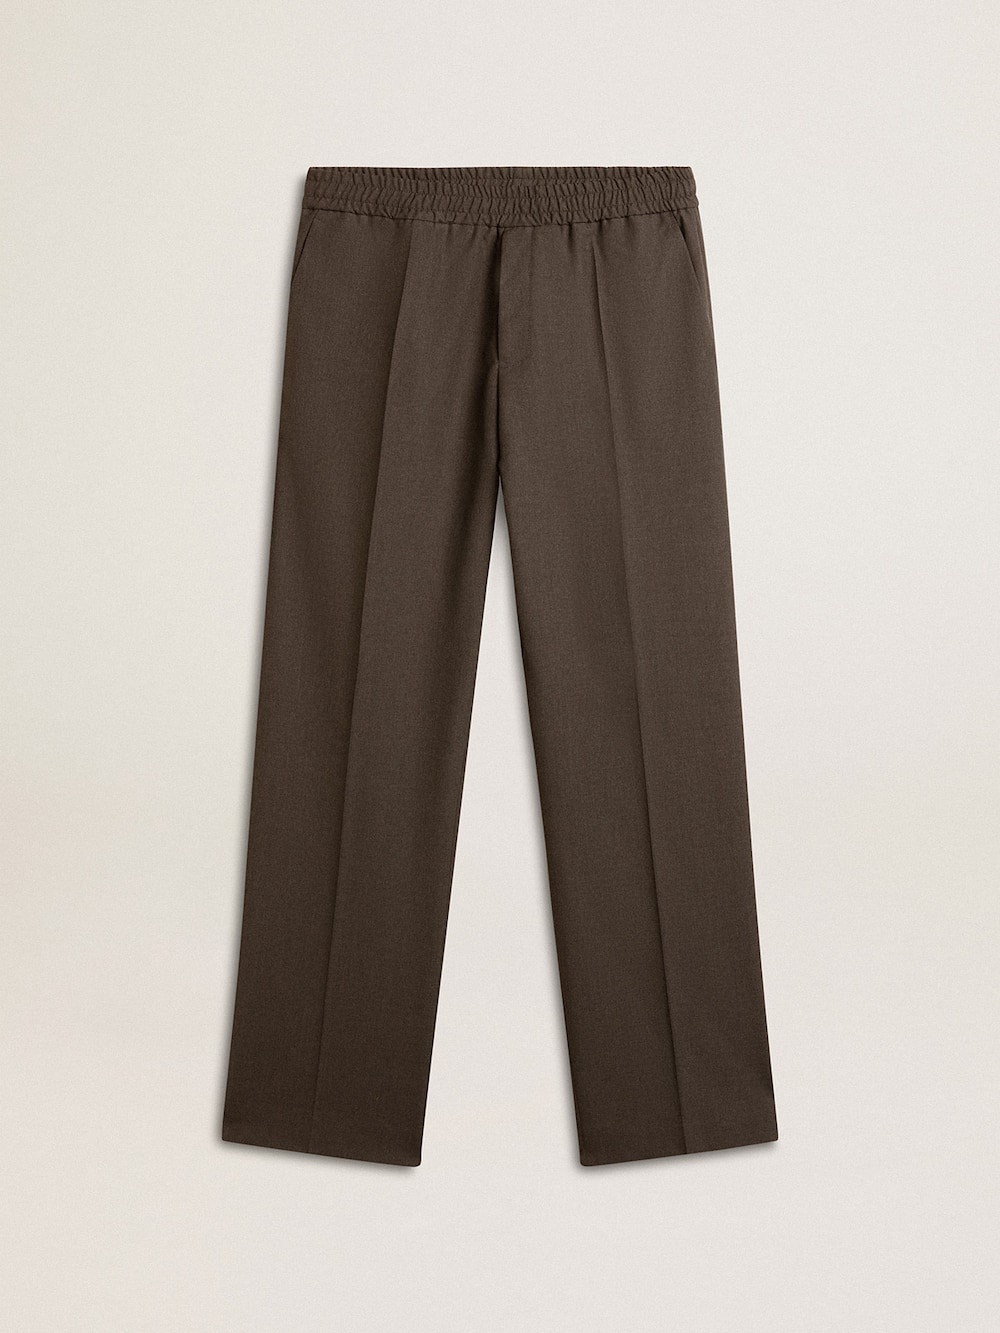 Golden Goose - Men's soft pants in anthracite gray wool in 